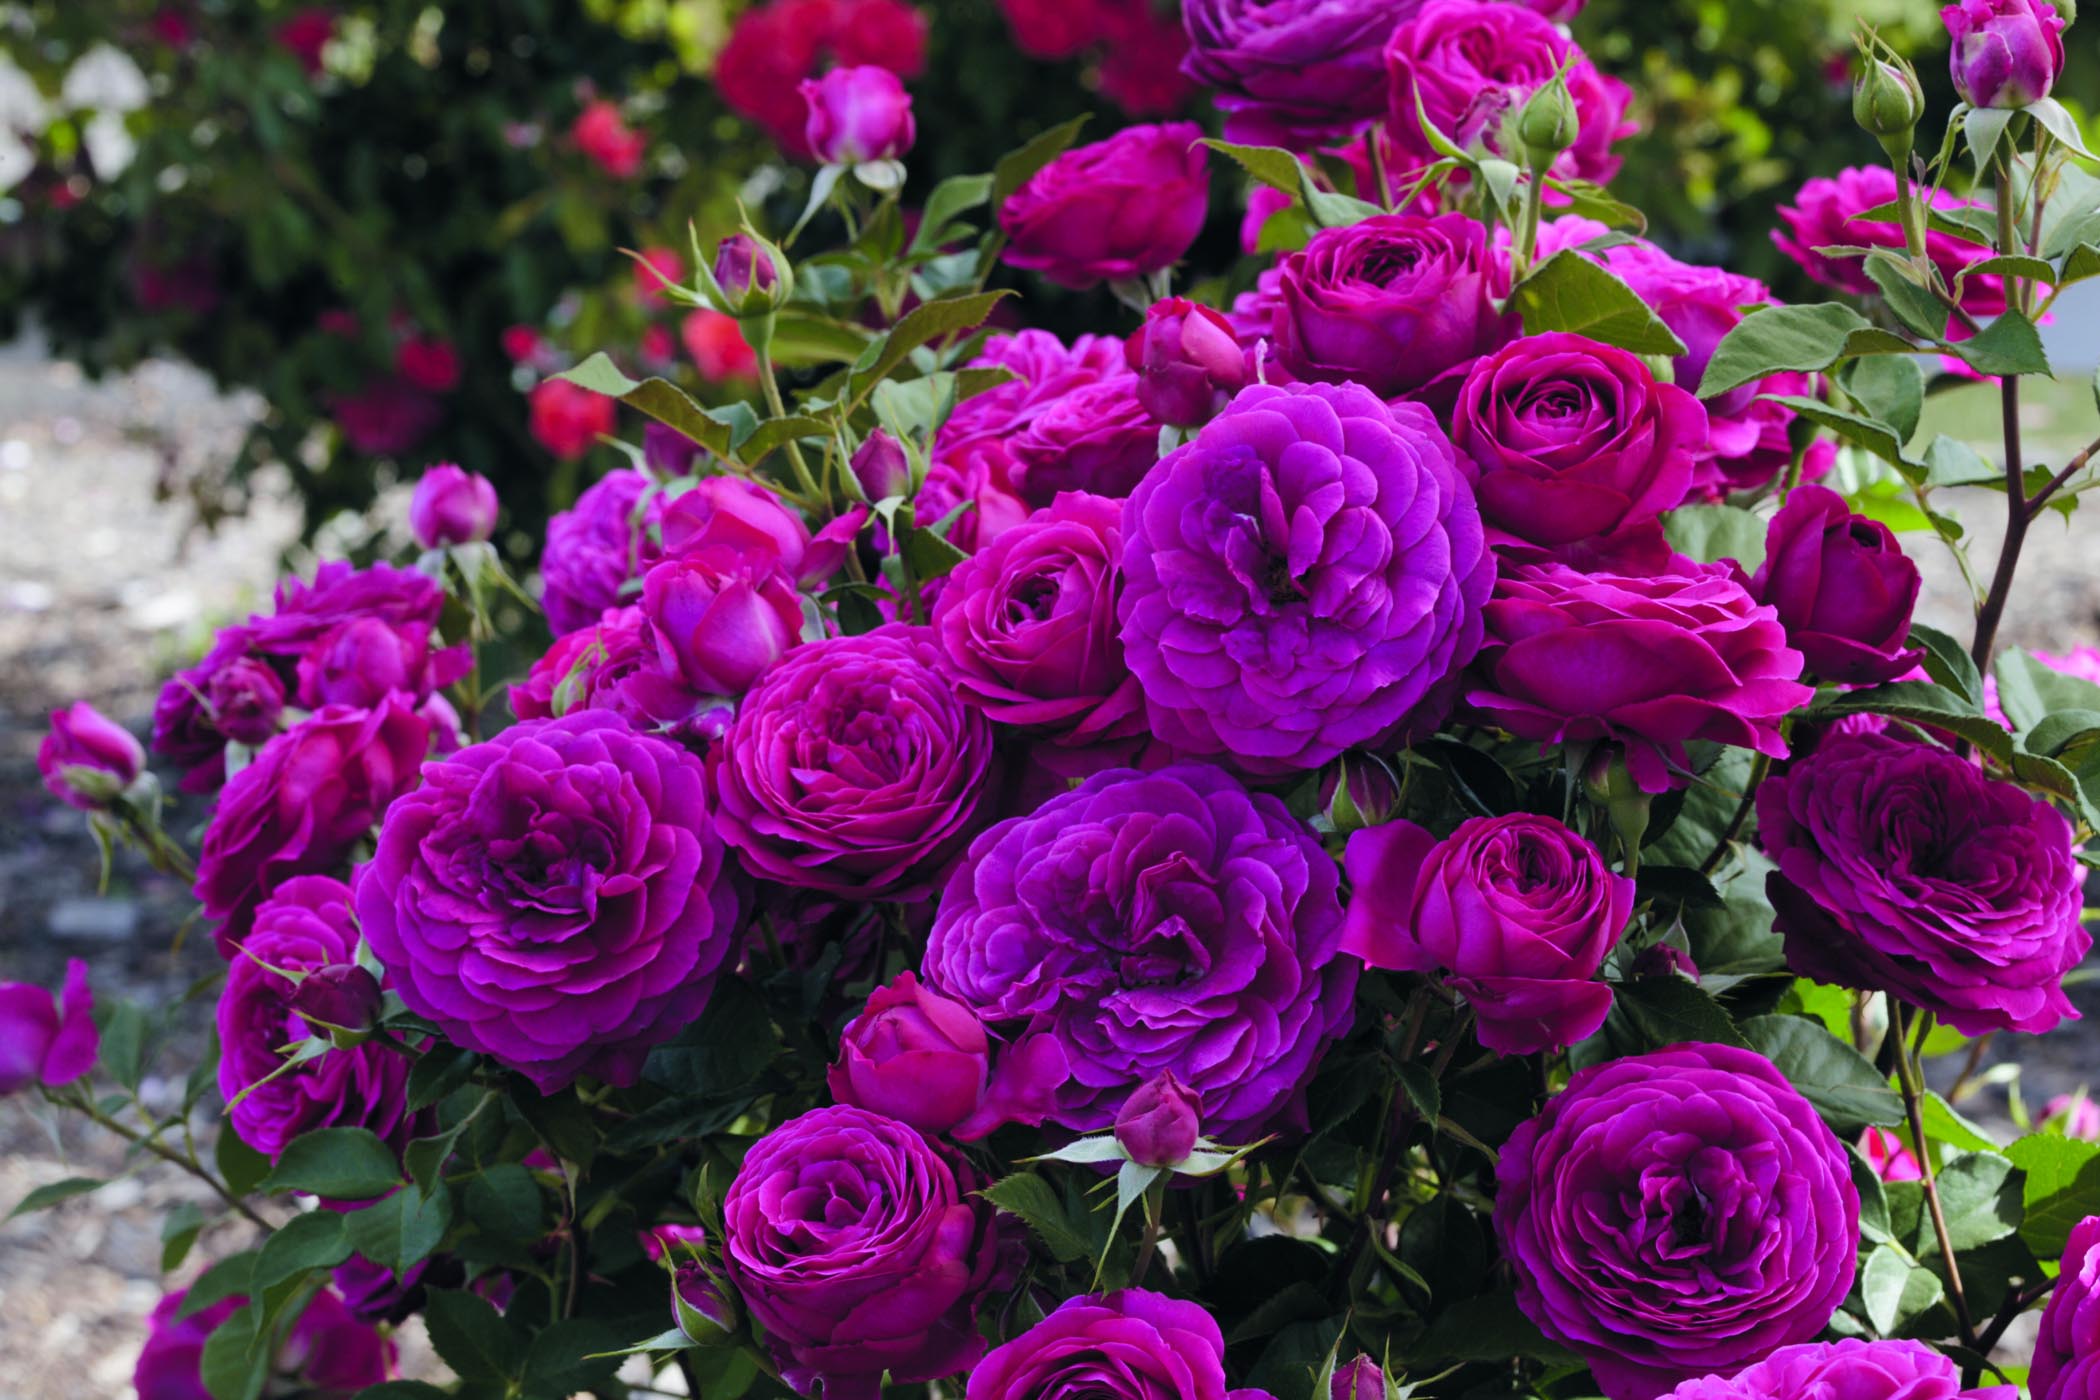 Armstrong Garden Celebrates 130th Anniversary With Free Roses